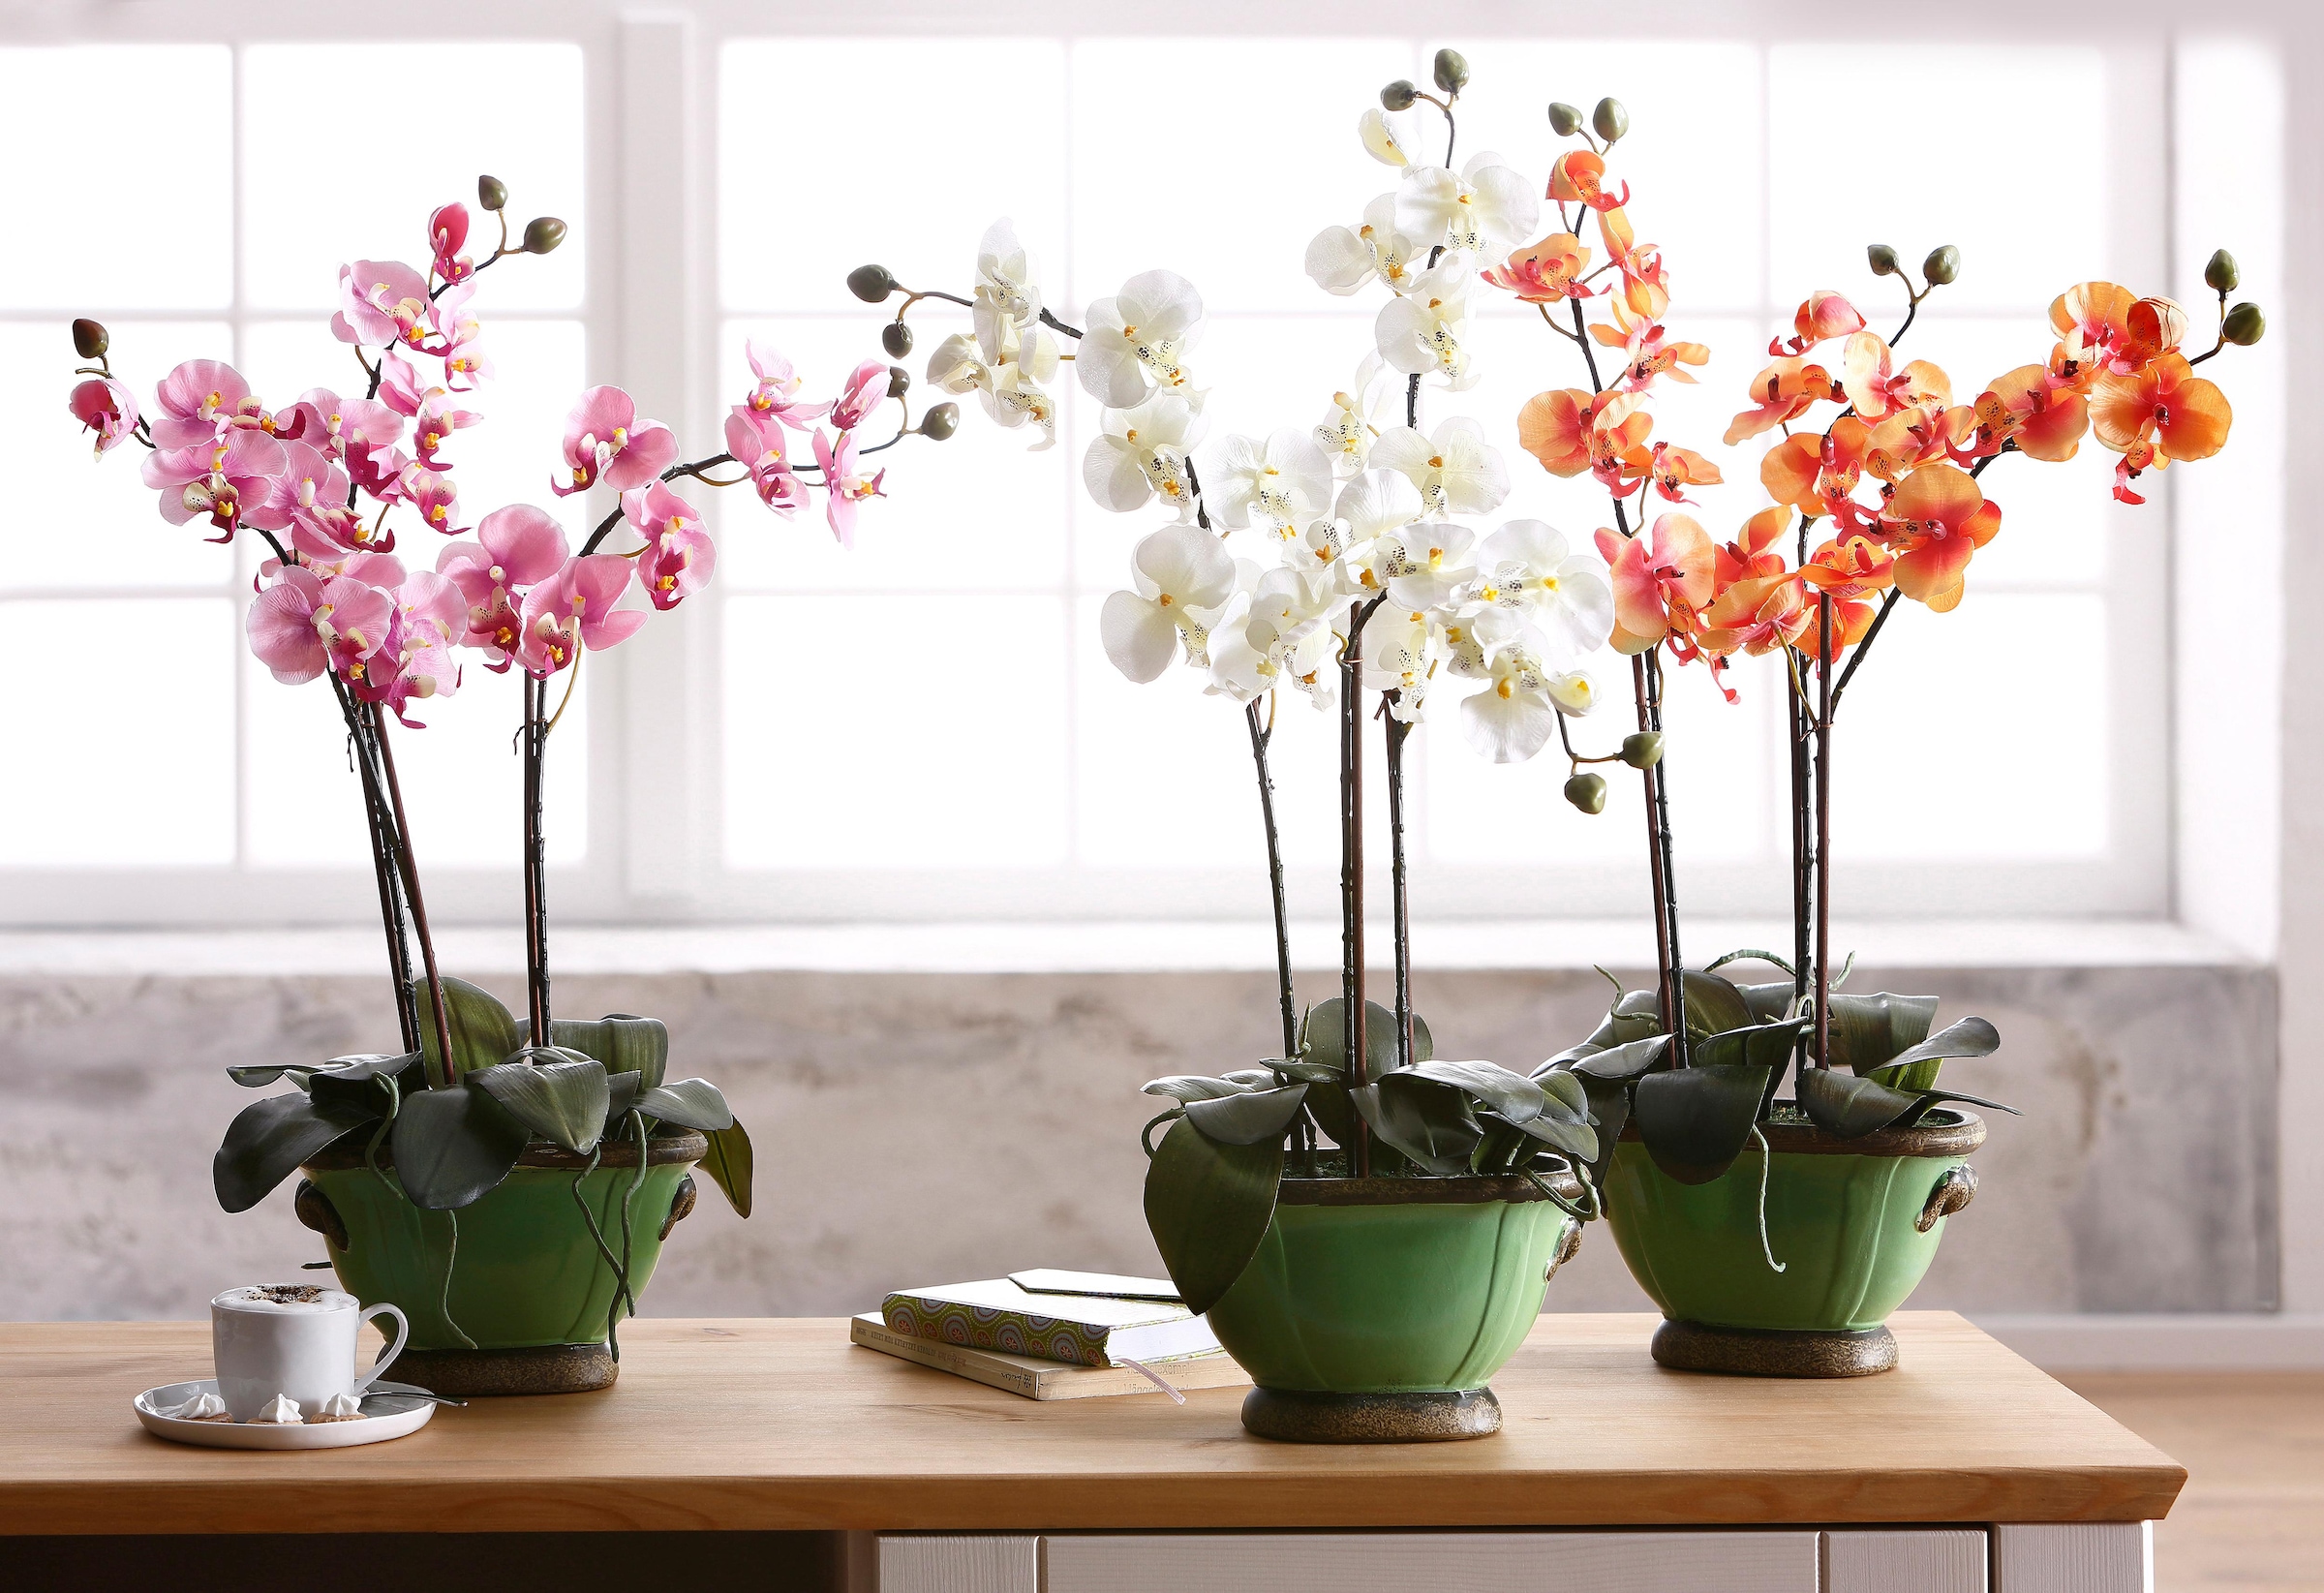 I.GE.A. Kunstpflanze »Orchidee« acheter confortablement